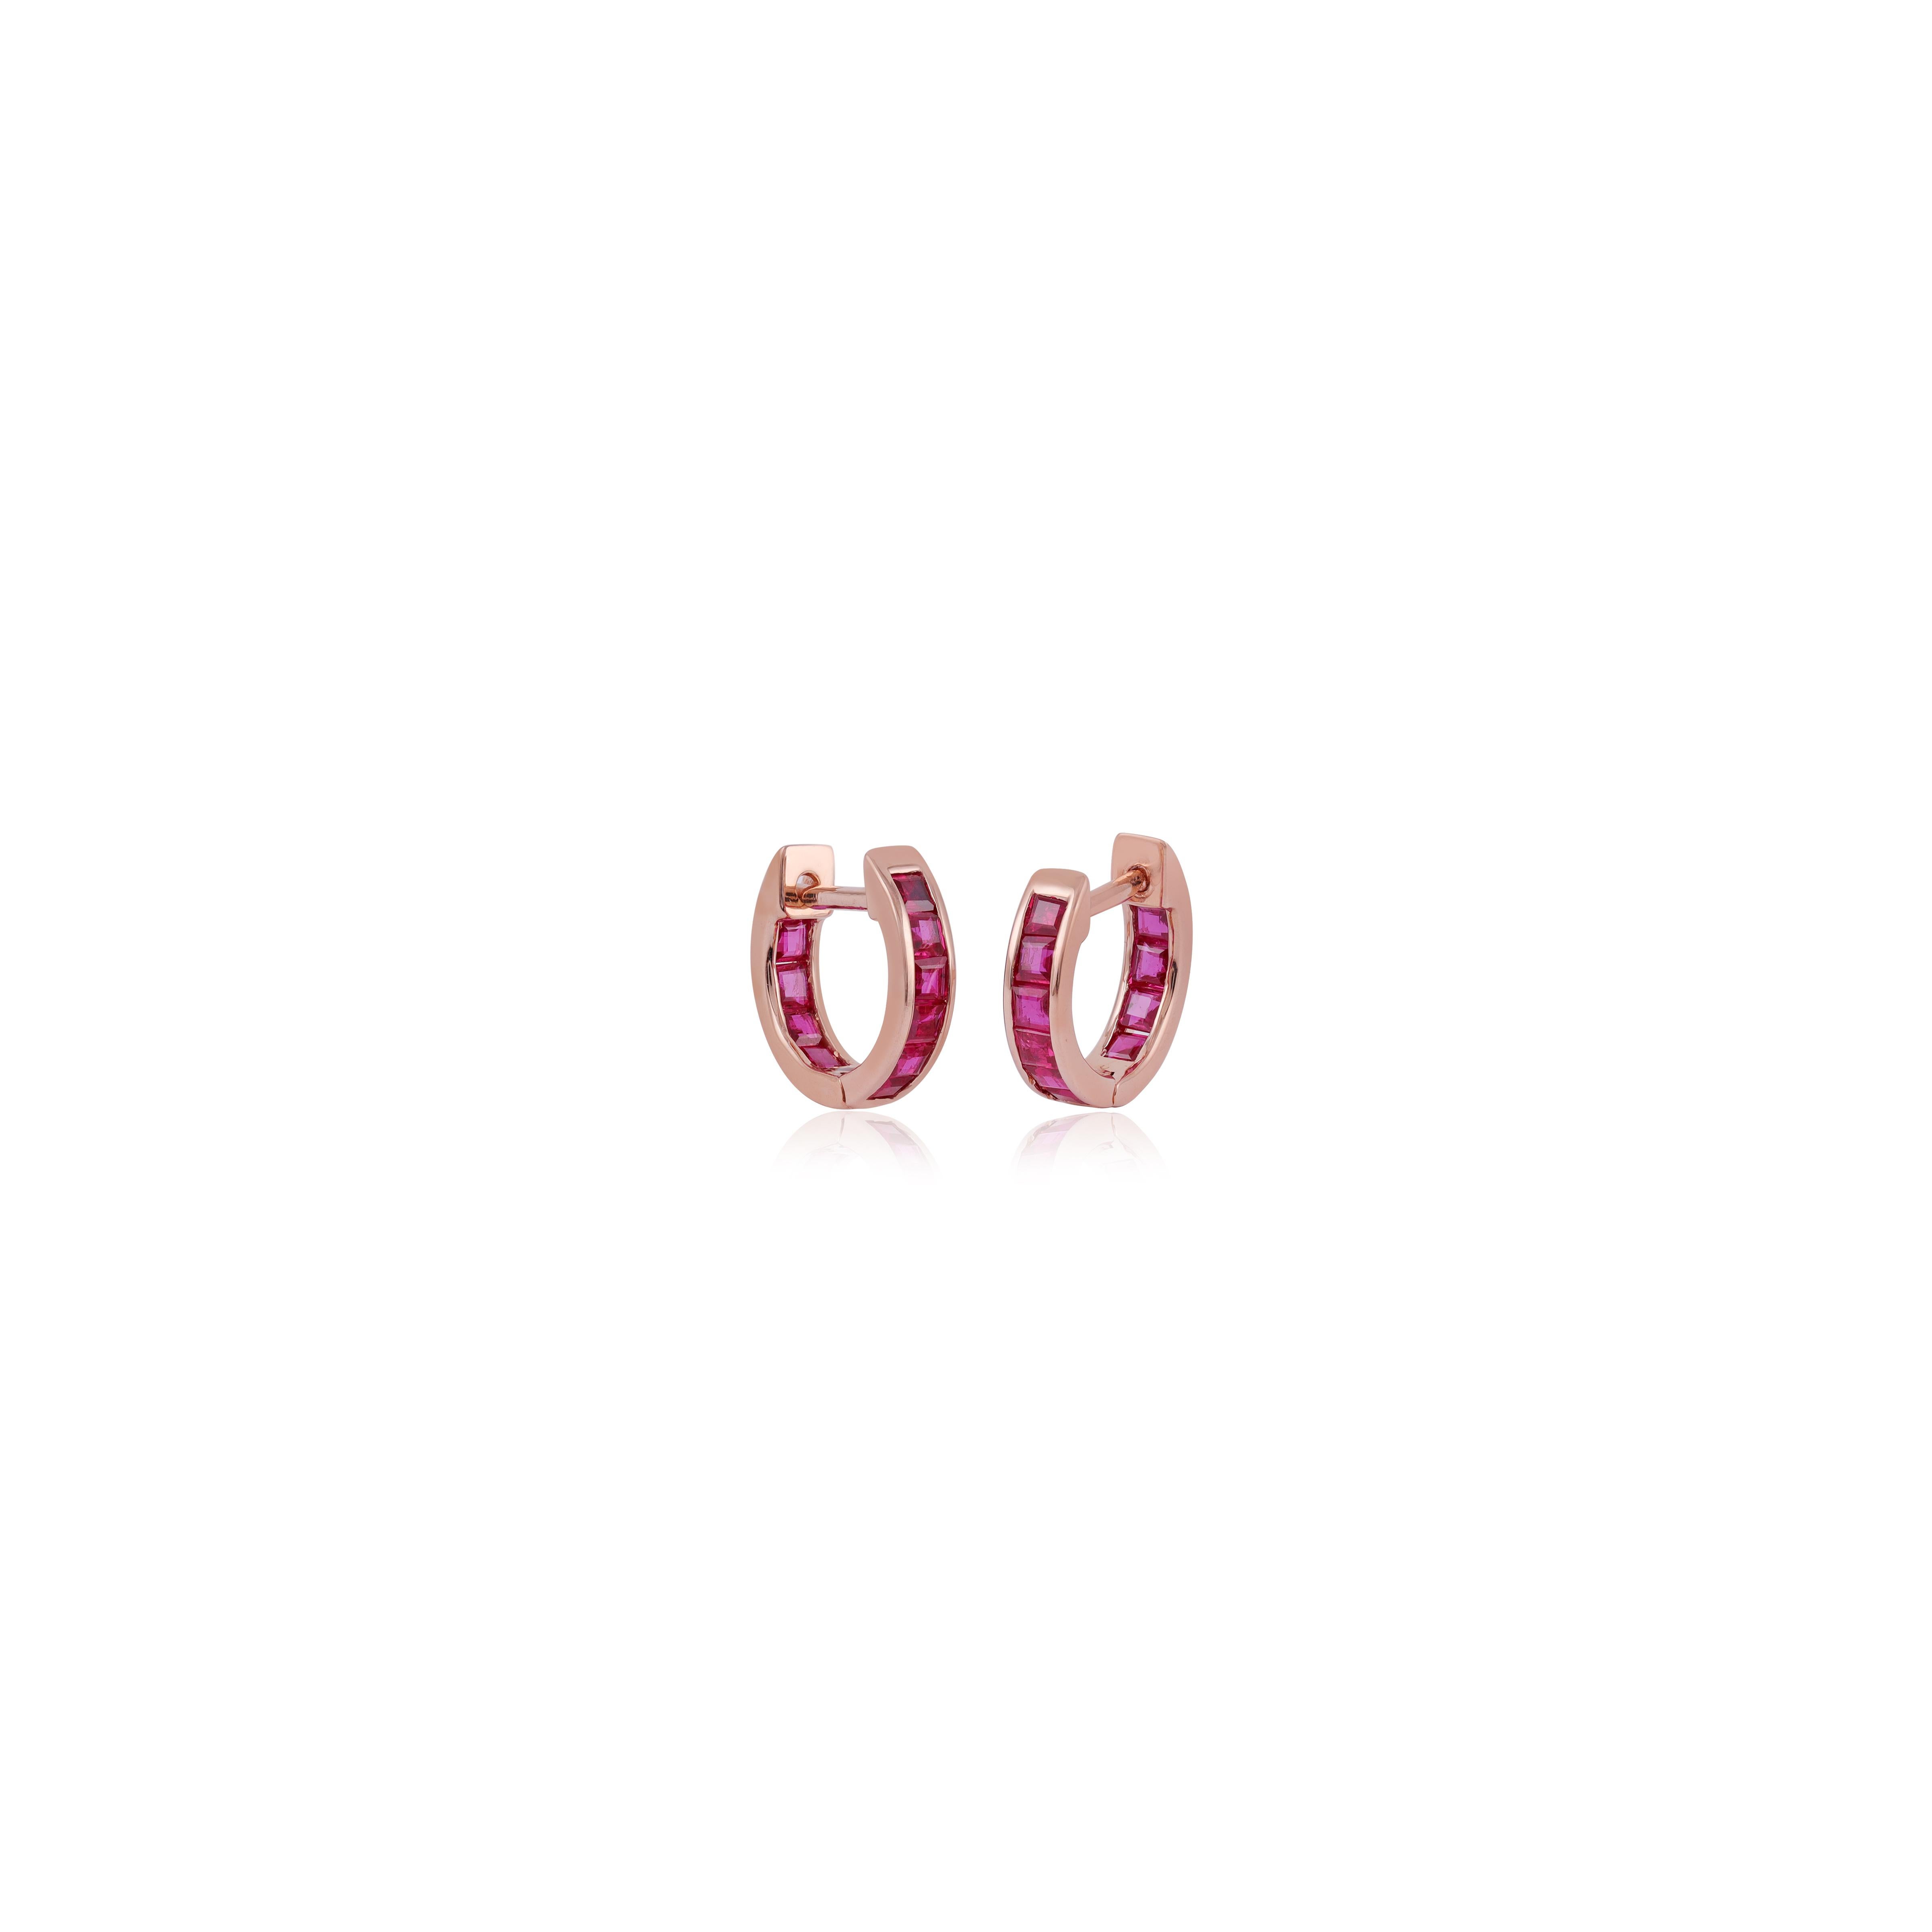 Cast in 18 karat Rose gold, these earrings are hand set with 1.06 carats Ruby . Available in Rose, Yellow and White gold. Comes in pair, can also be bought as single earring.

Composition
 Ruby Weight: 1.06 Carat
Gold-2.21 gm


